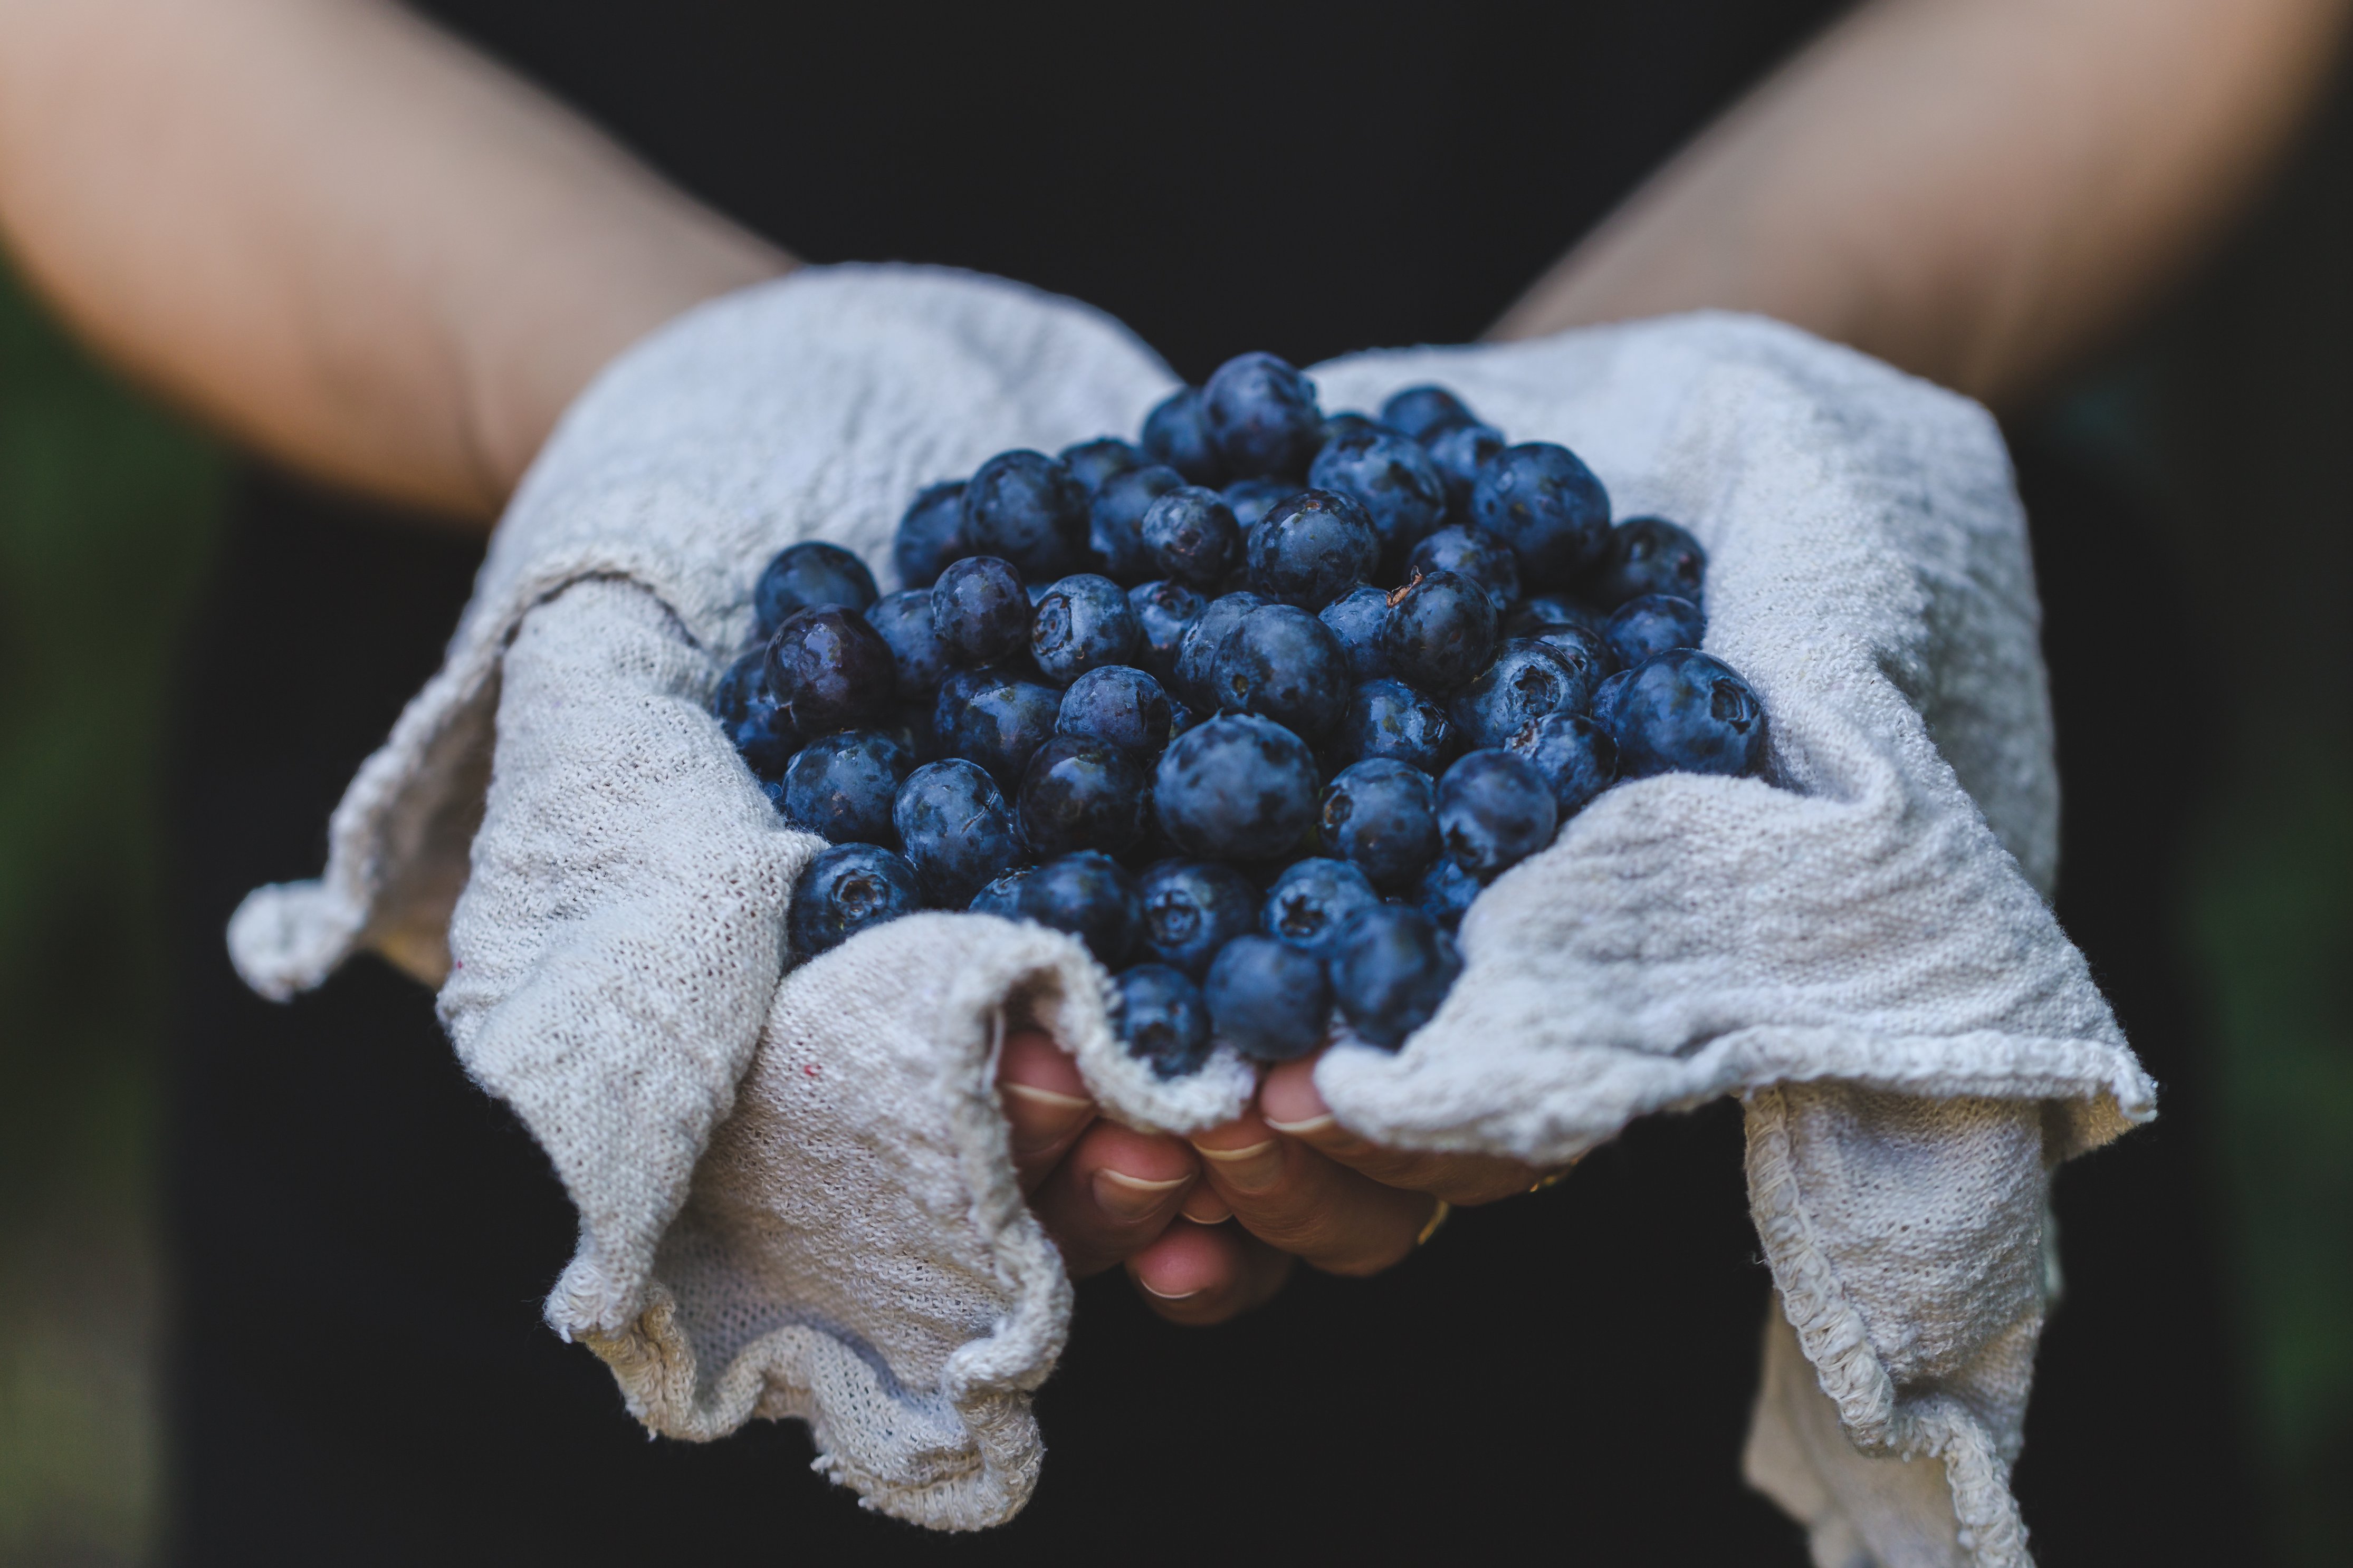 A pair of hands holds out an enormous bunch of blueberries resting on a towel.